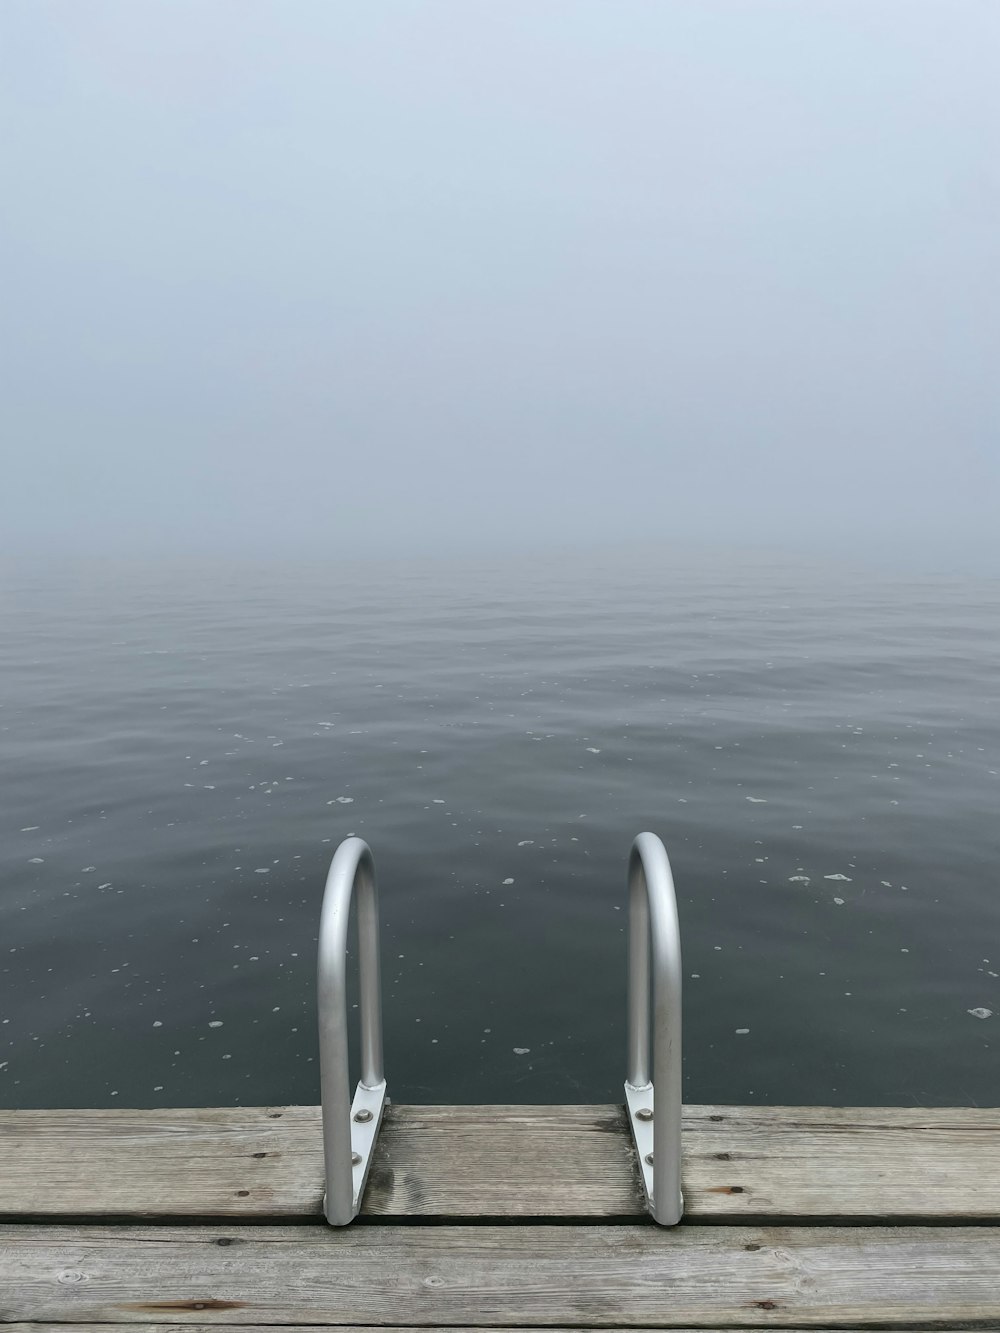 a dock with a railing and a body of water in the background